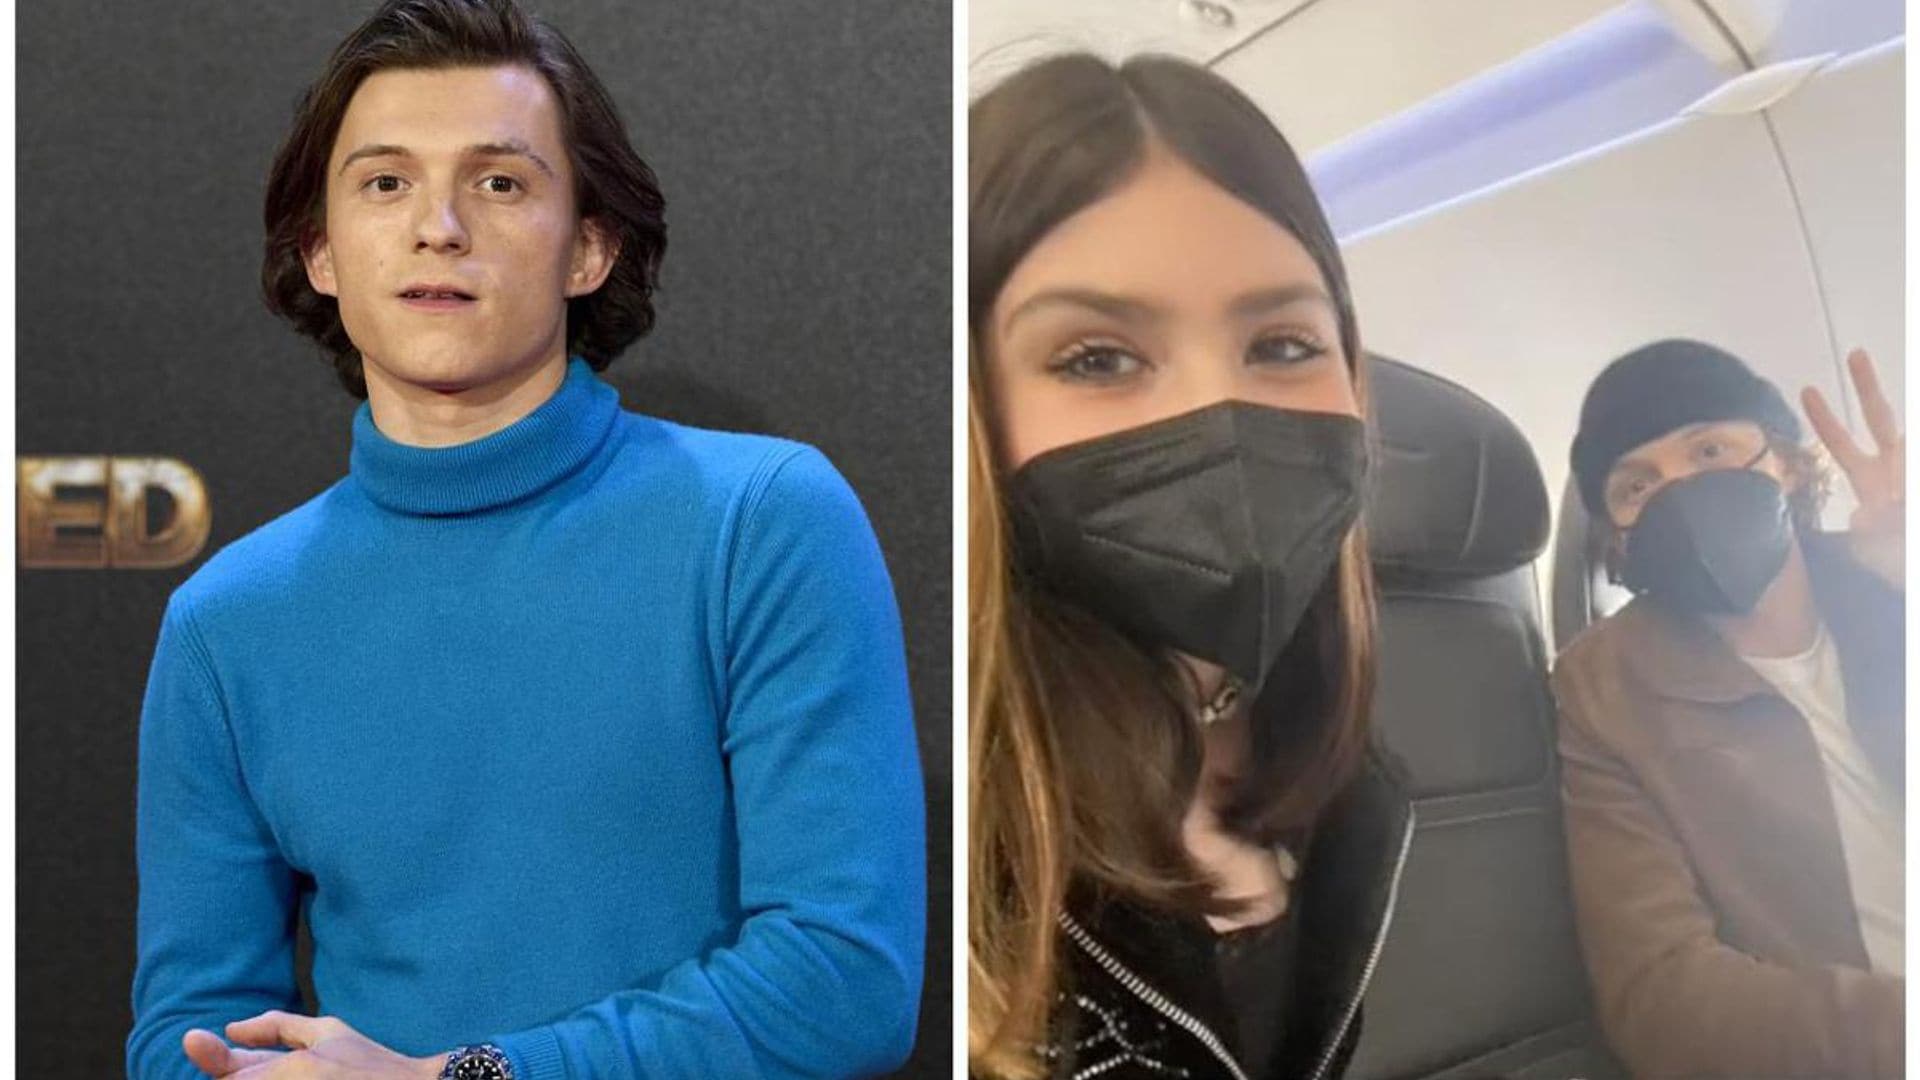 Tom Holland happily hangs out with fan sitting next to him on a flight